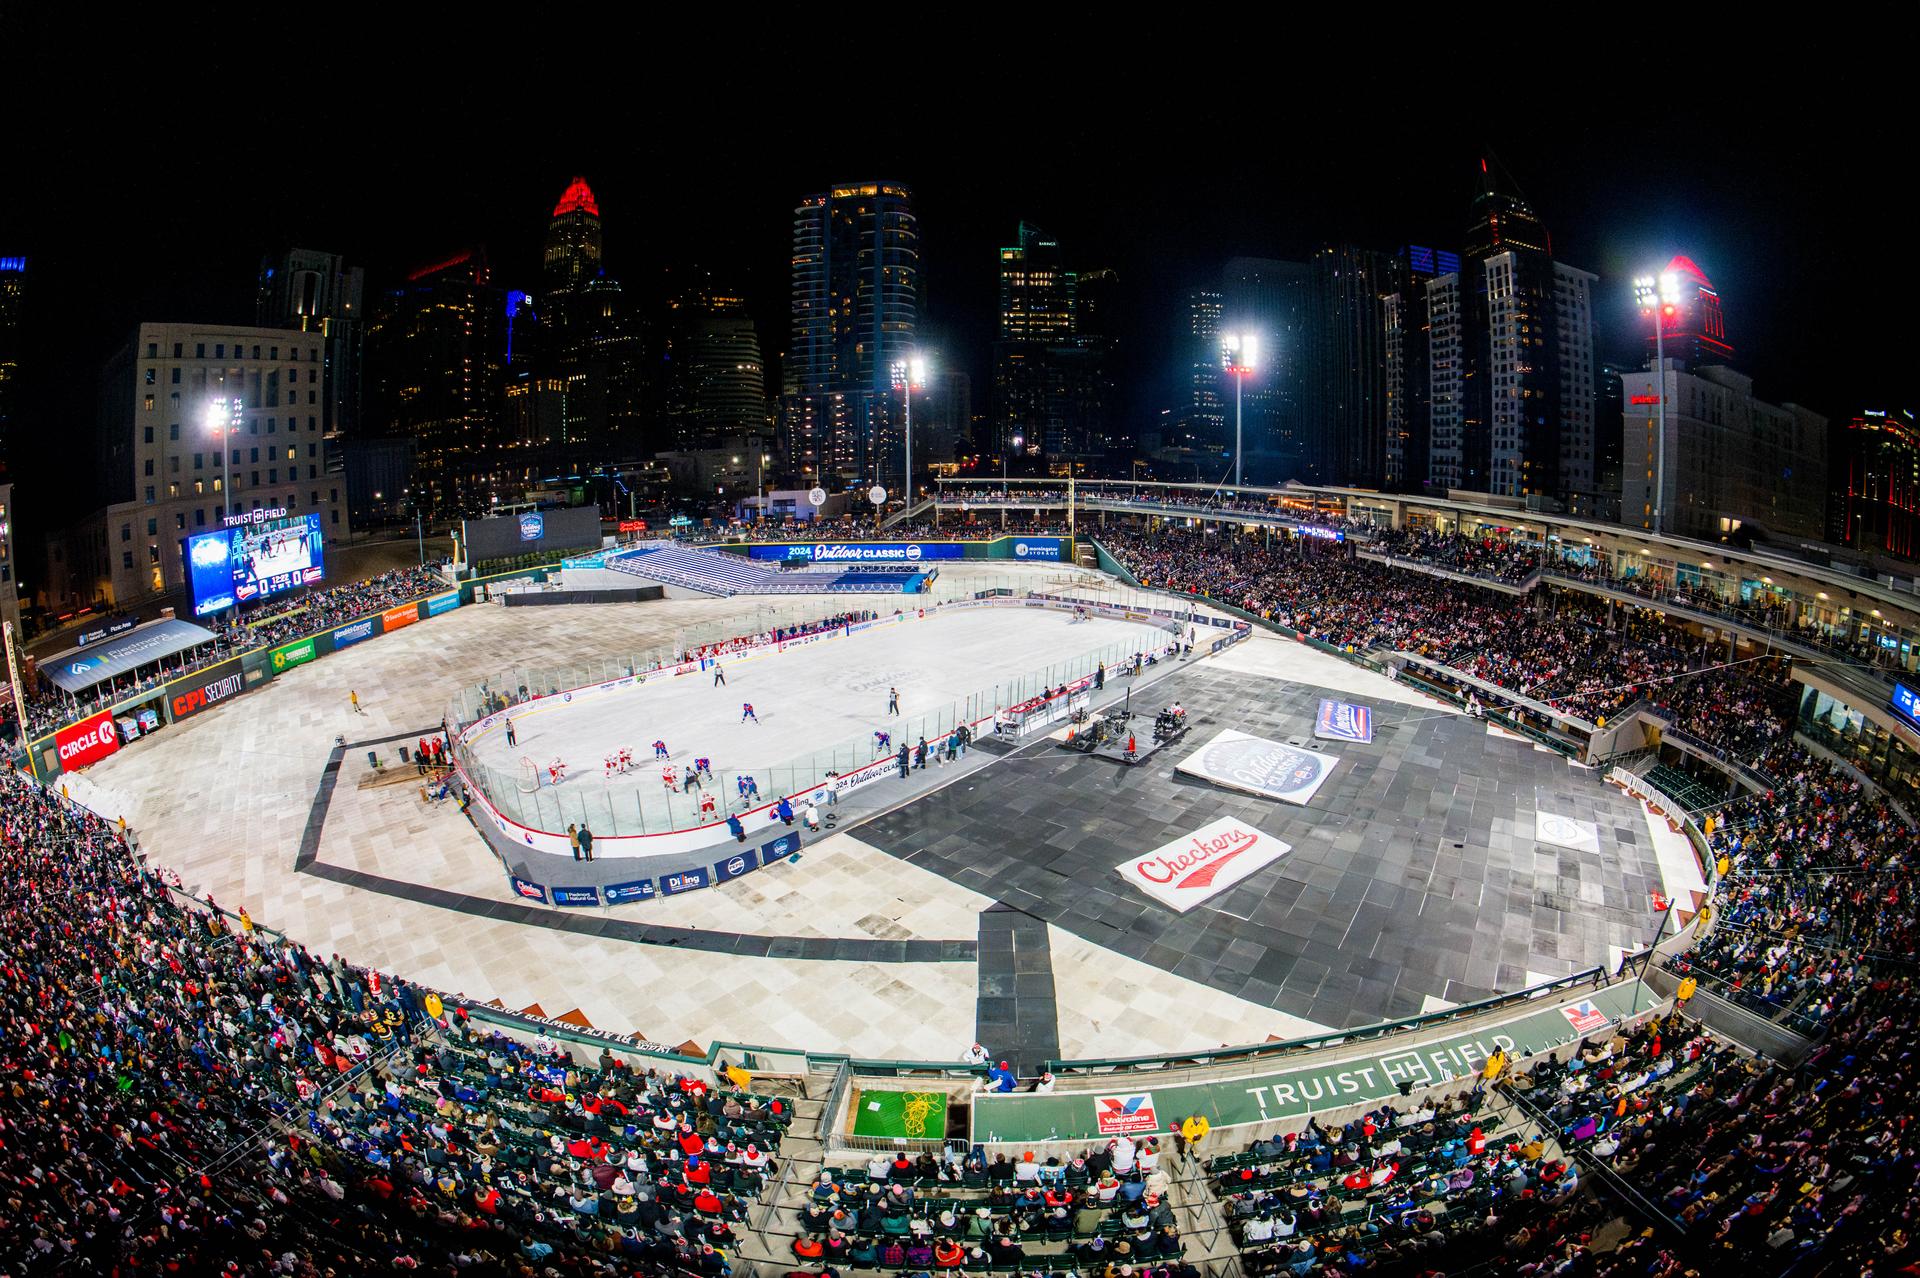 An overhead view of the Queen City Outdoor Classic